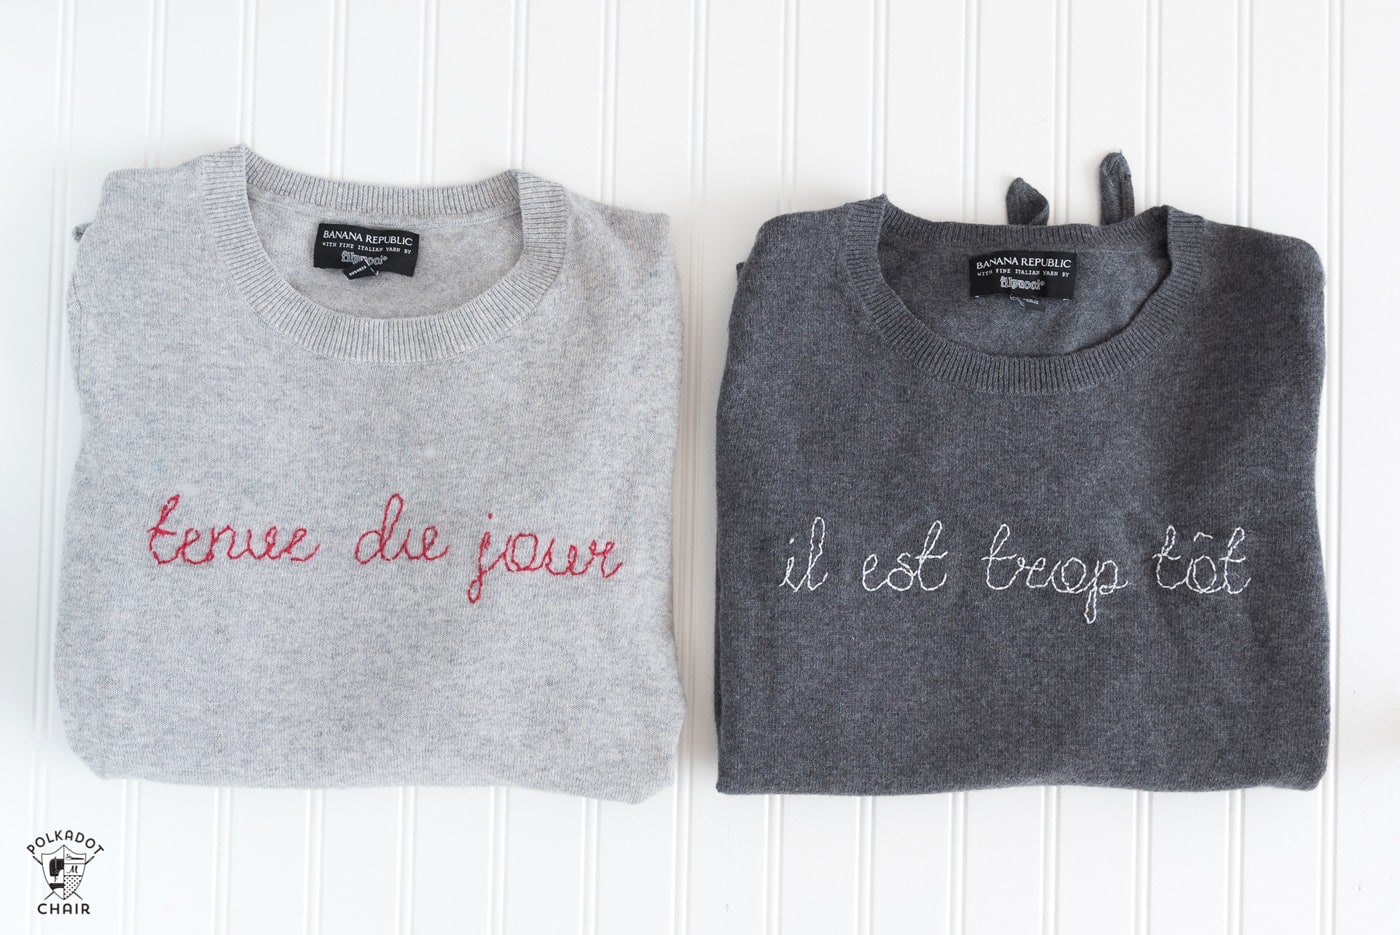 Learn how to make a DIY Embroidered sweater with a fun french quote on it. Includes free embroidery pattern for the quote. A clever way to refashion an old sweater. #DIYEmbroidery #DIYFashion #embroideredsweater #tutorial